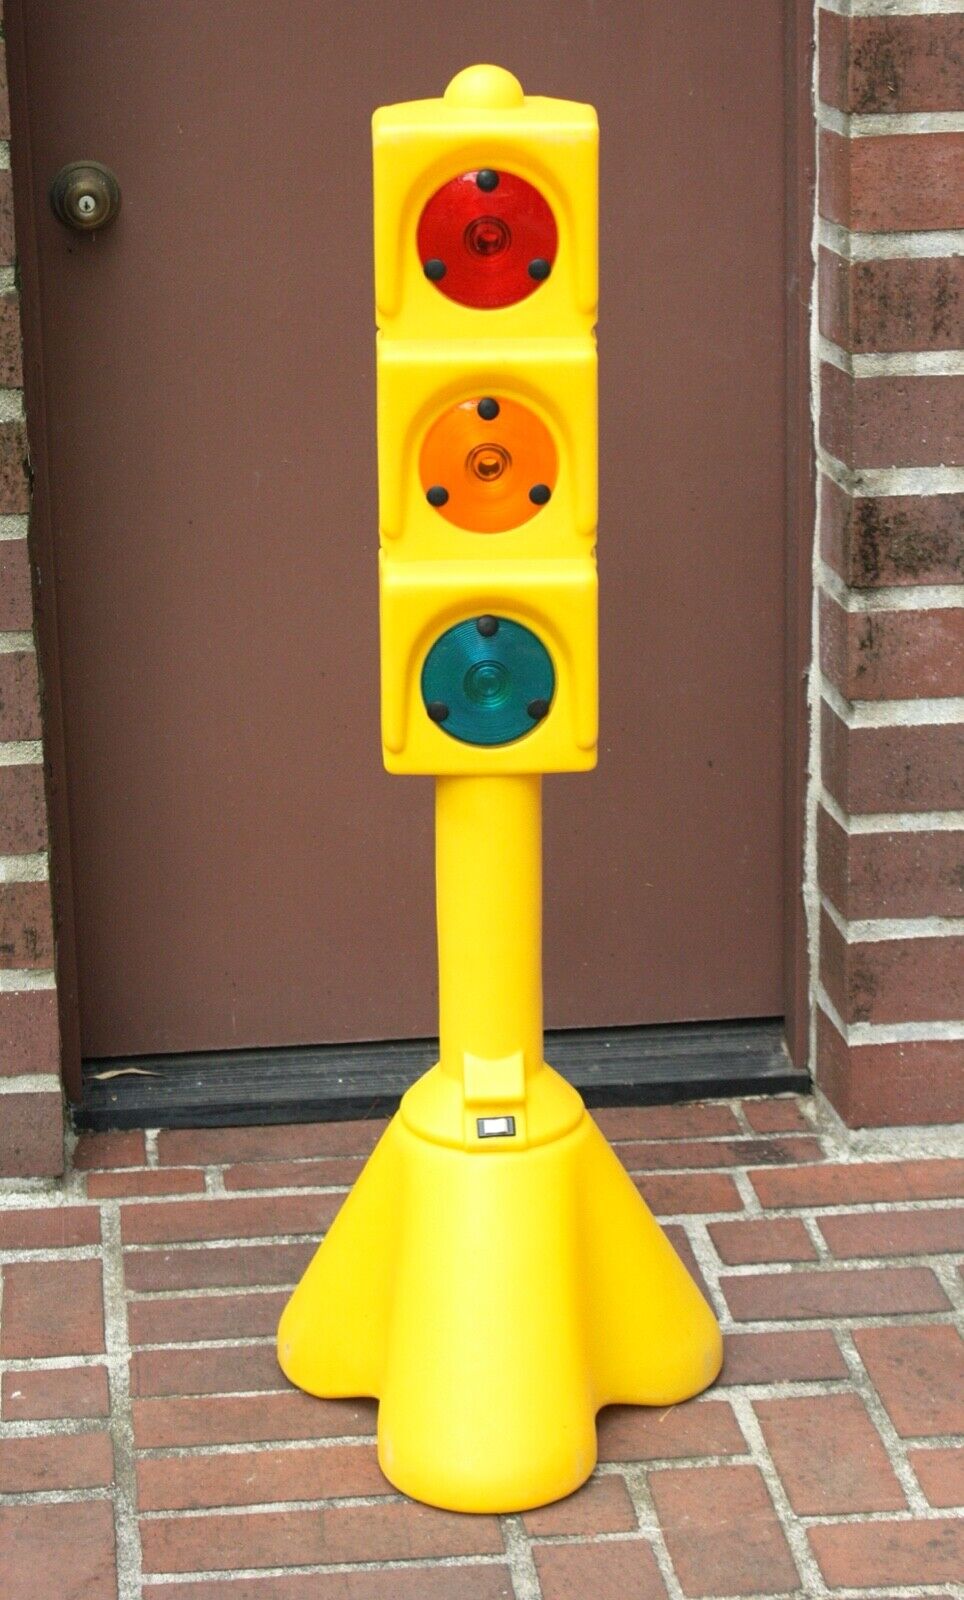 EXTREMELY RARE VINTAGE FISHER PRICE POWER WHEELS TRAFFIC LIGHT 45" TALL BATTERY